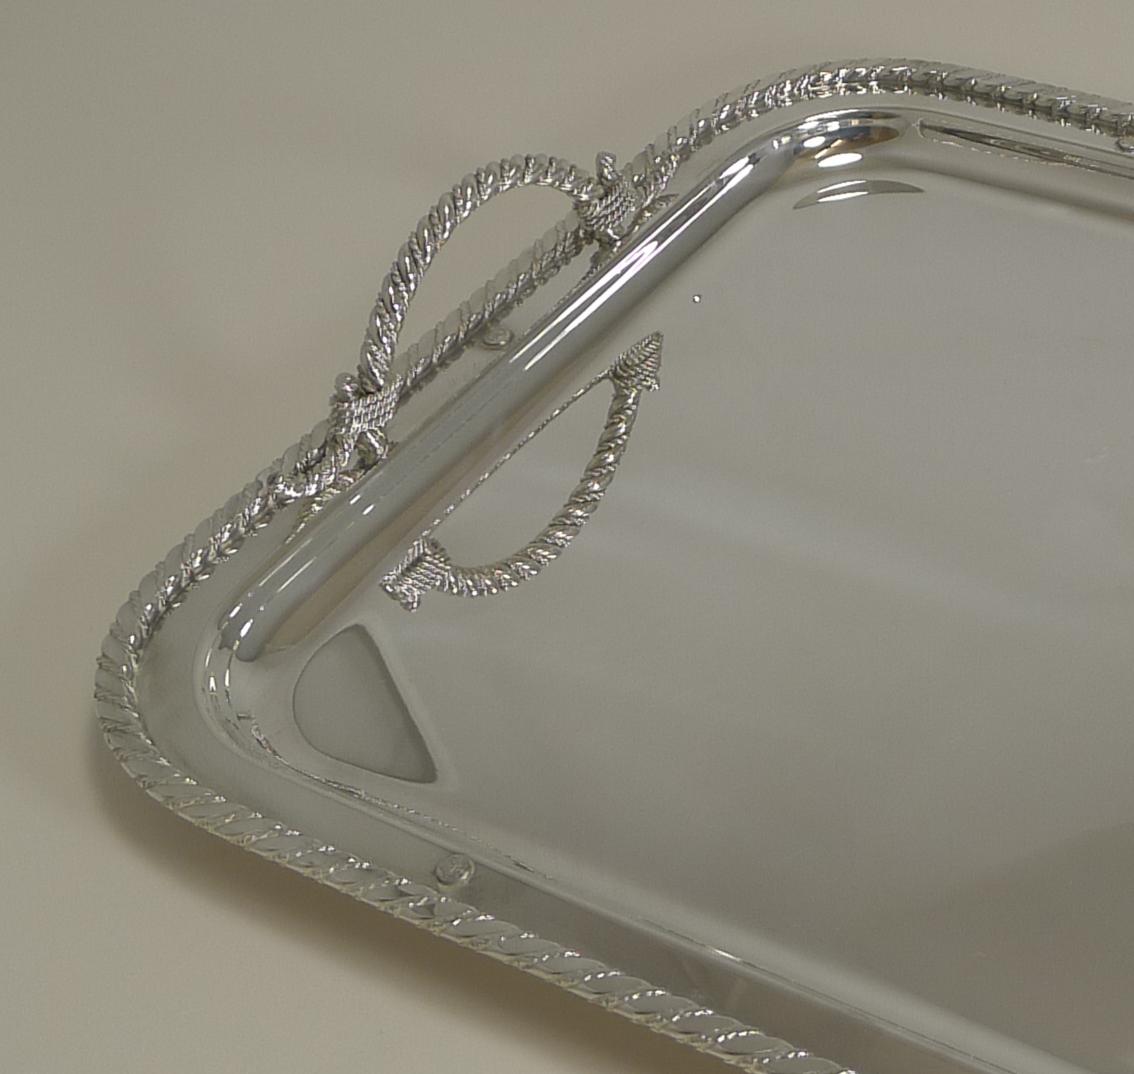 Vintage Christian Dior Silver Plated Serving Tray, circa 1970 For Sale 1